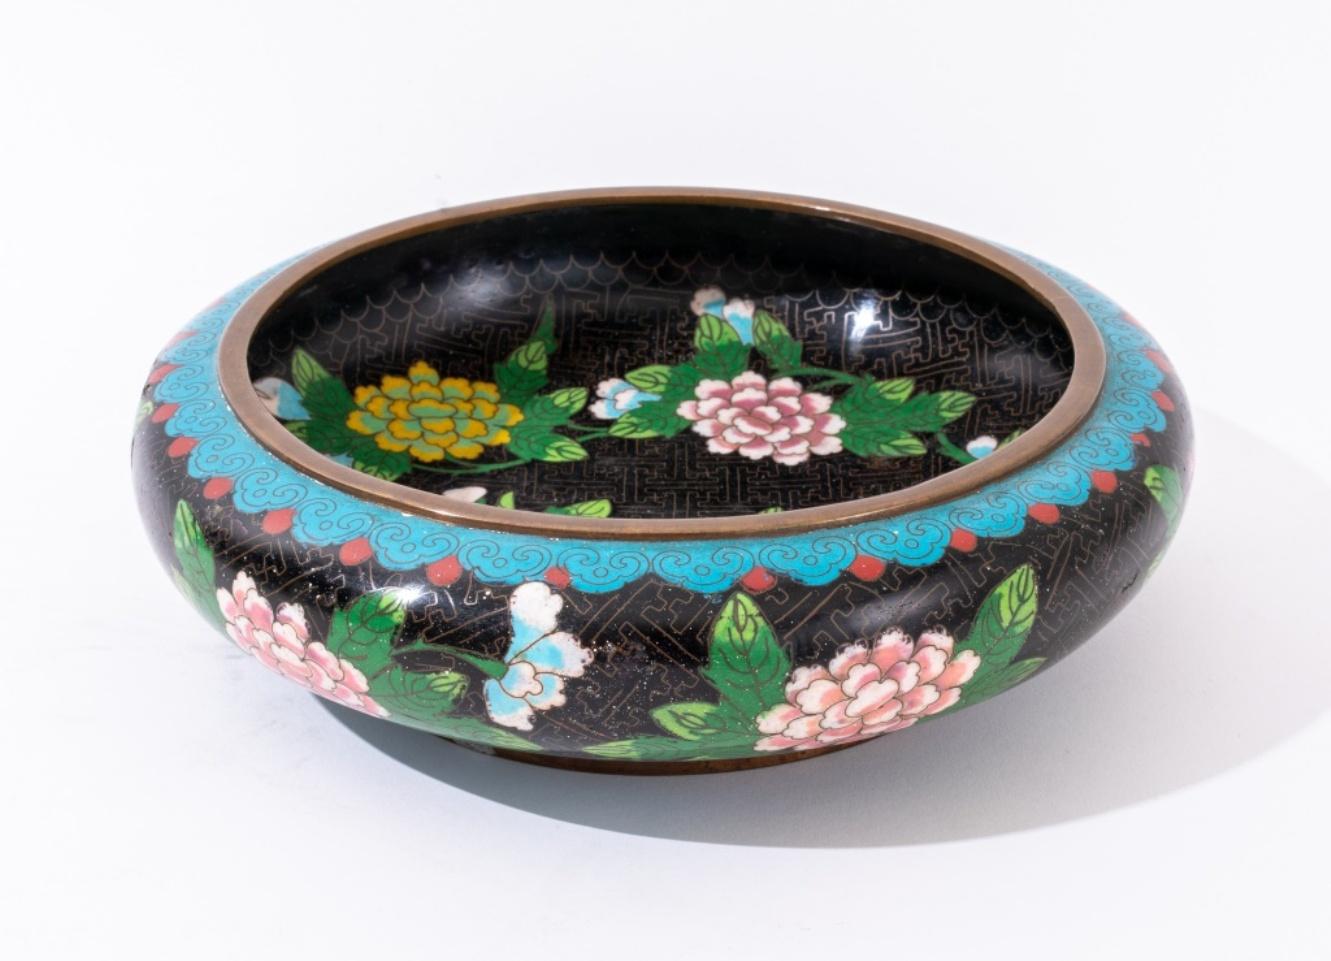 Group of three Chinese cloisonne enamel gilt metal ornaments comprising one vase with dragon motif and two center bowls, one with dragon pattern and the other with chrysanthemums, all in polychrome shaded enamels with black background. Largest: 3